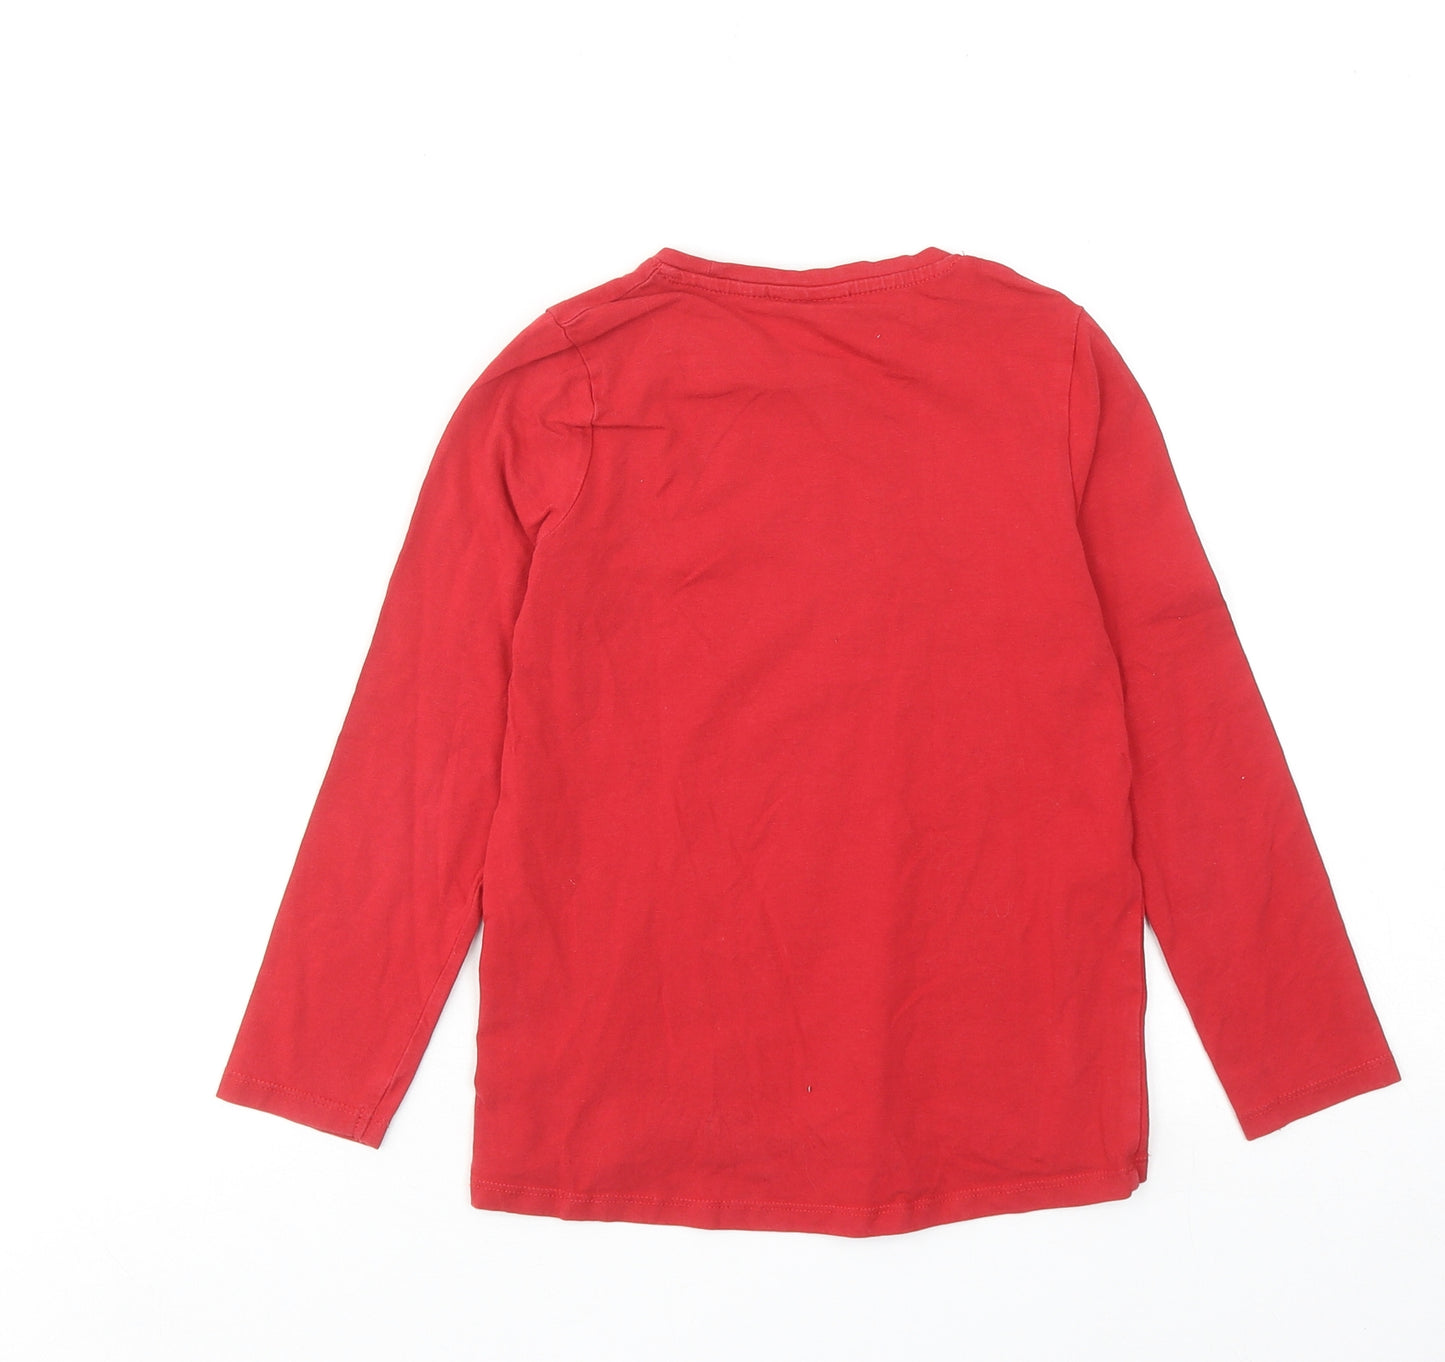 Stop + Go Girls Red Cotton Basic T-Shirt Size 6-7 Years Round Neck Pullover - Reindeer